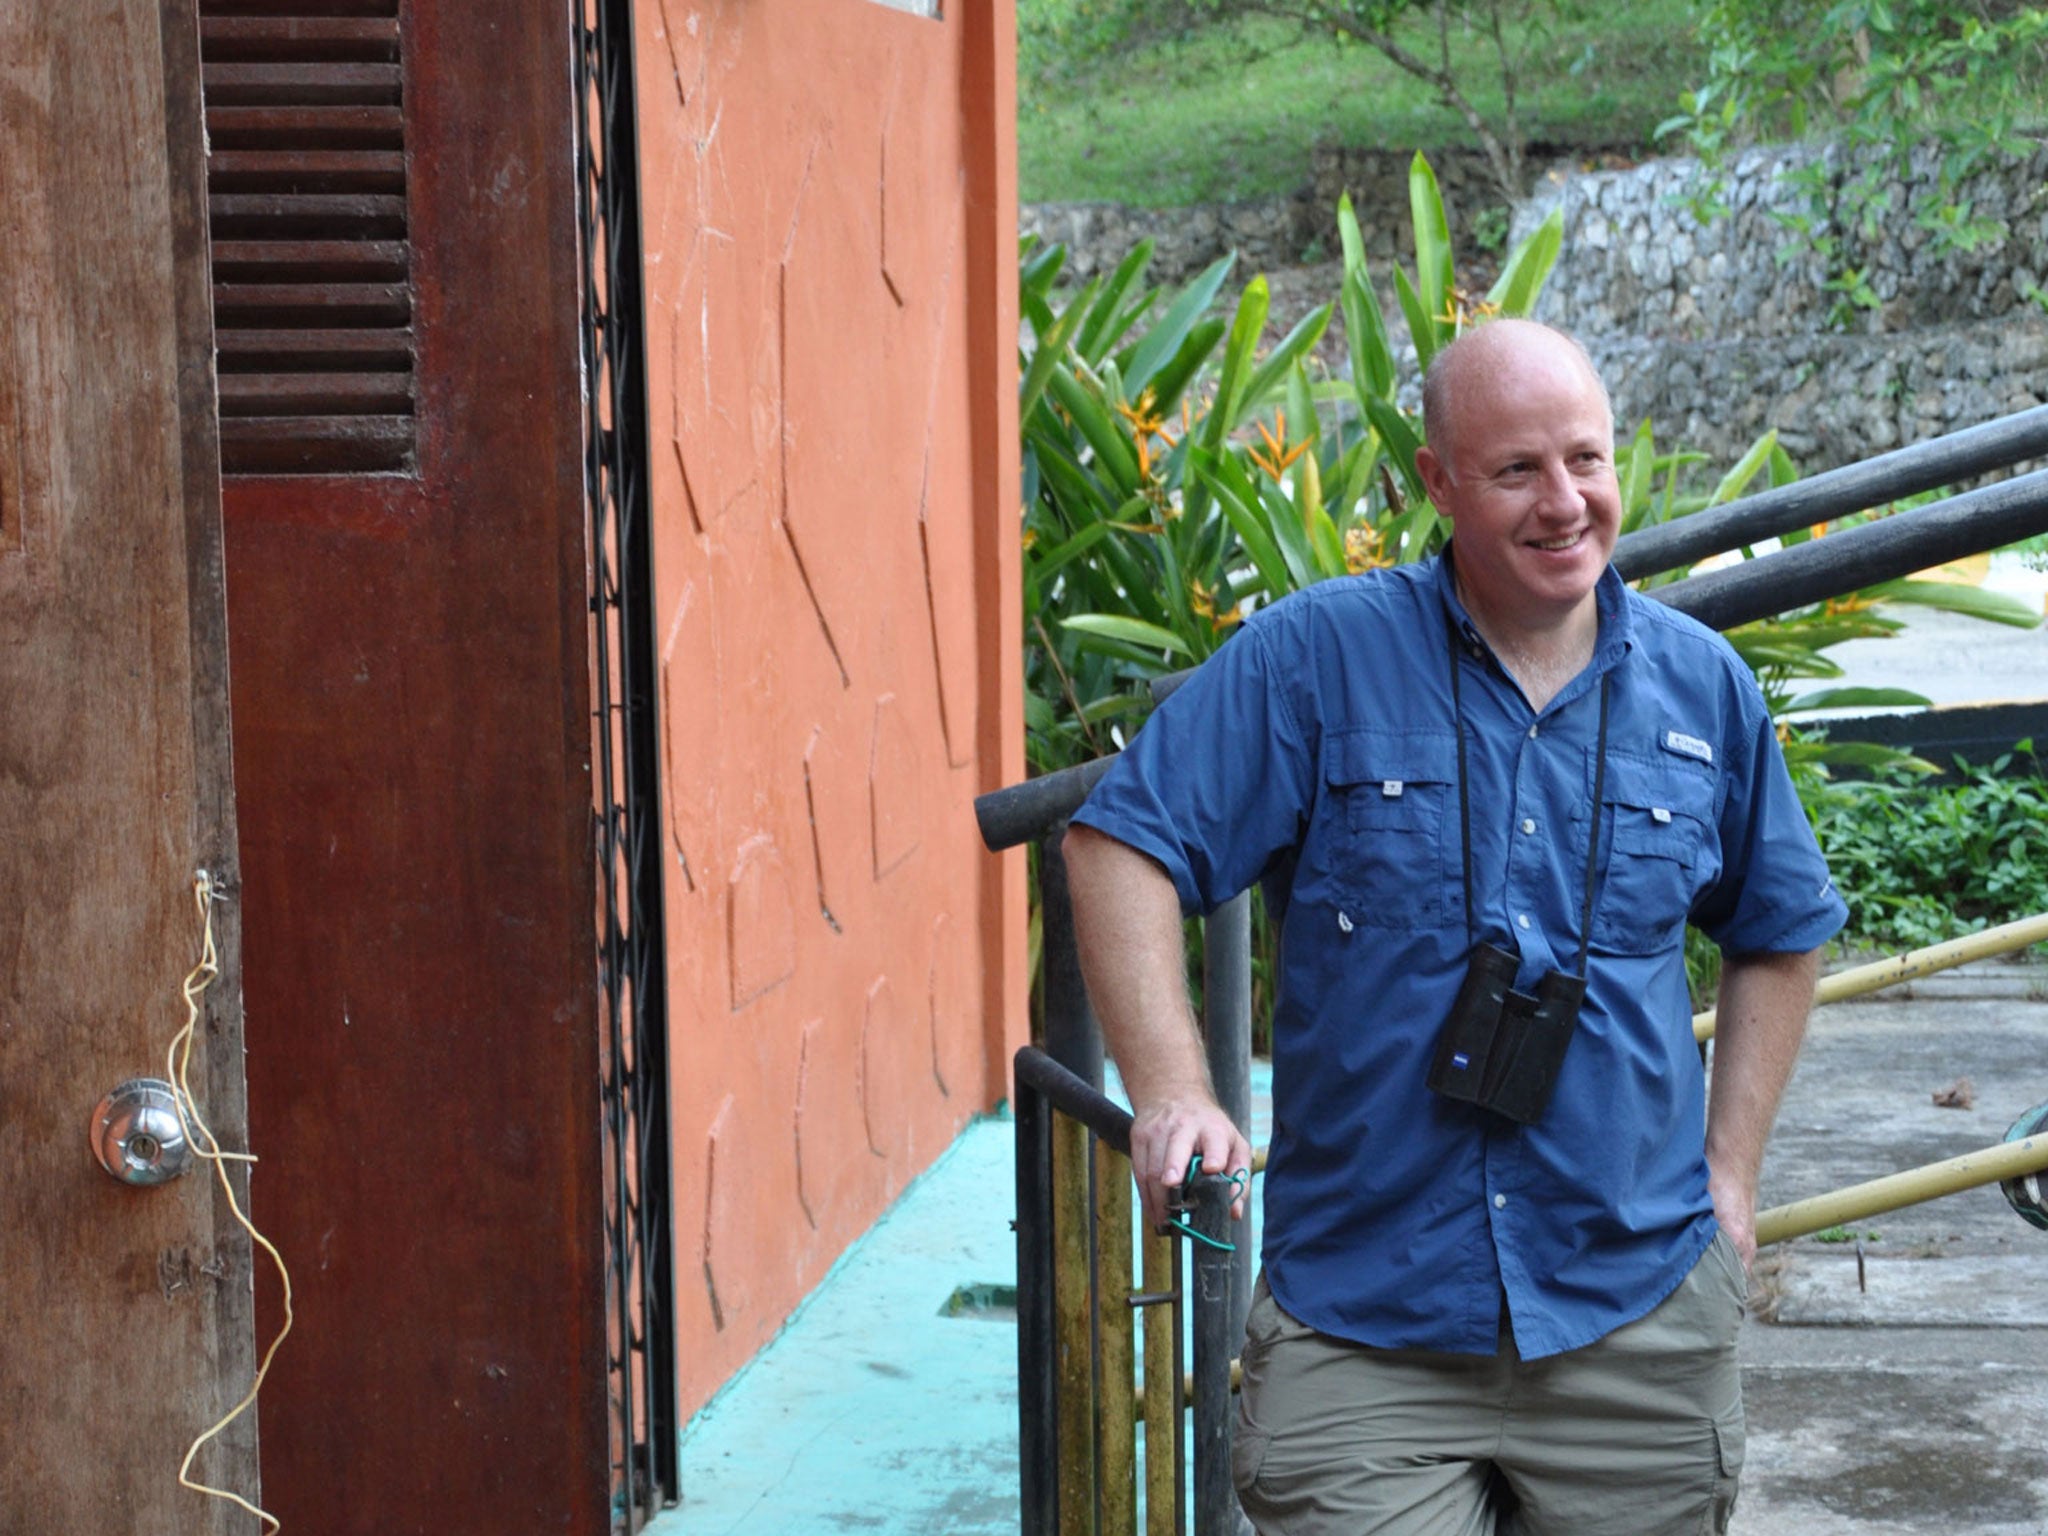 Peter Daszak, the parasitologist who leads EcoHealth Alliance’s work in 20 countries, at its Borneo base